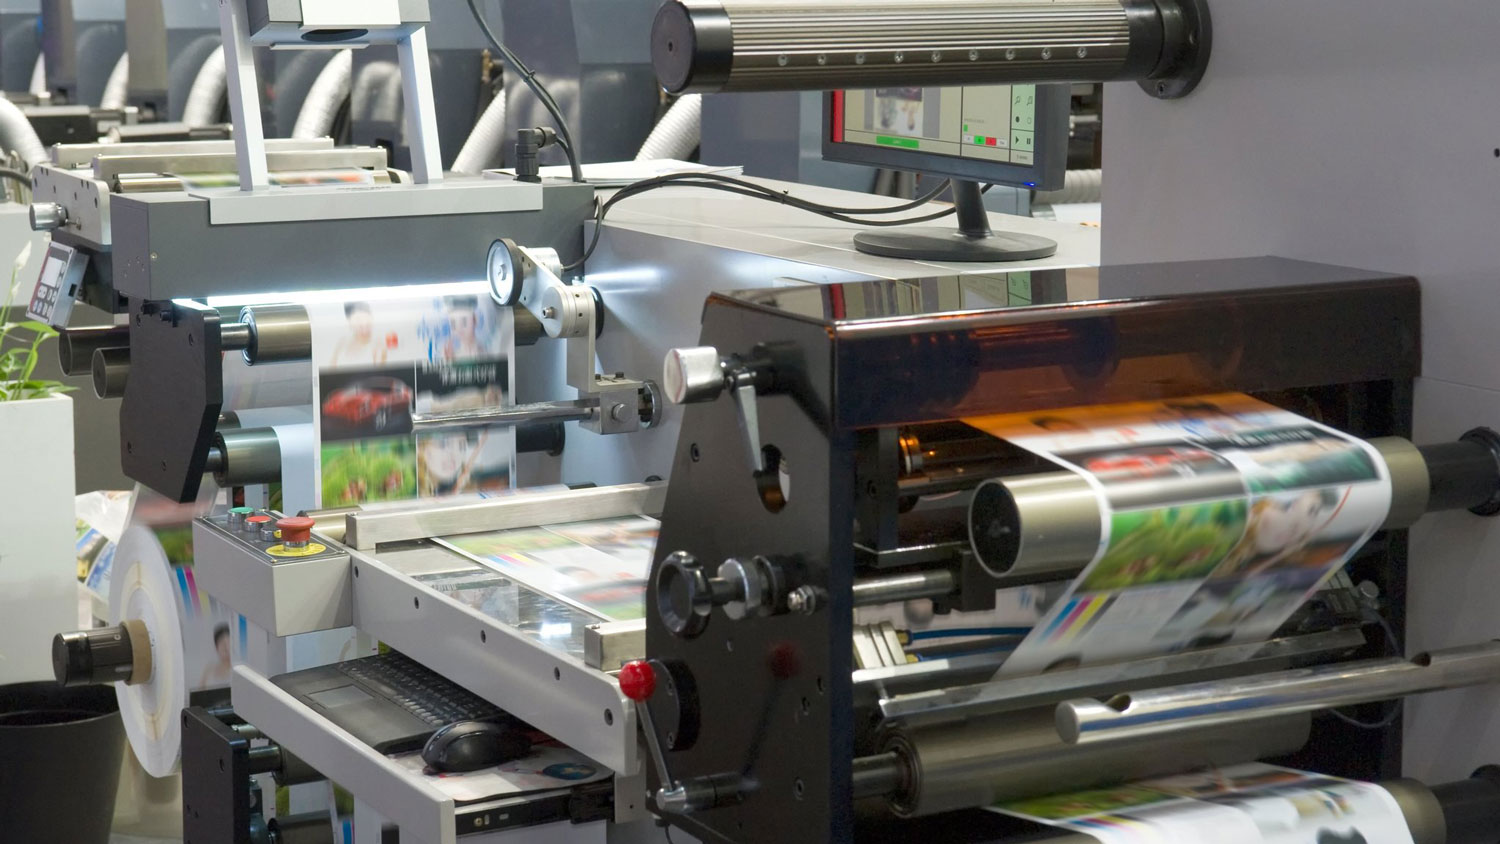 Customers in Smithtown, NY who need a very large quantity of prints benefit most from offset printing services.